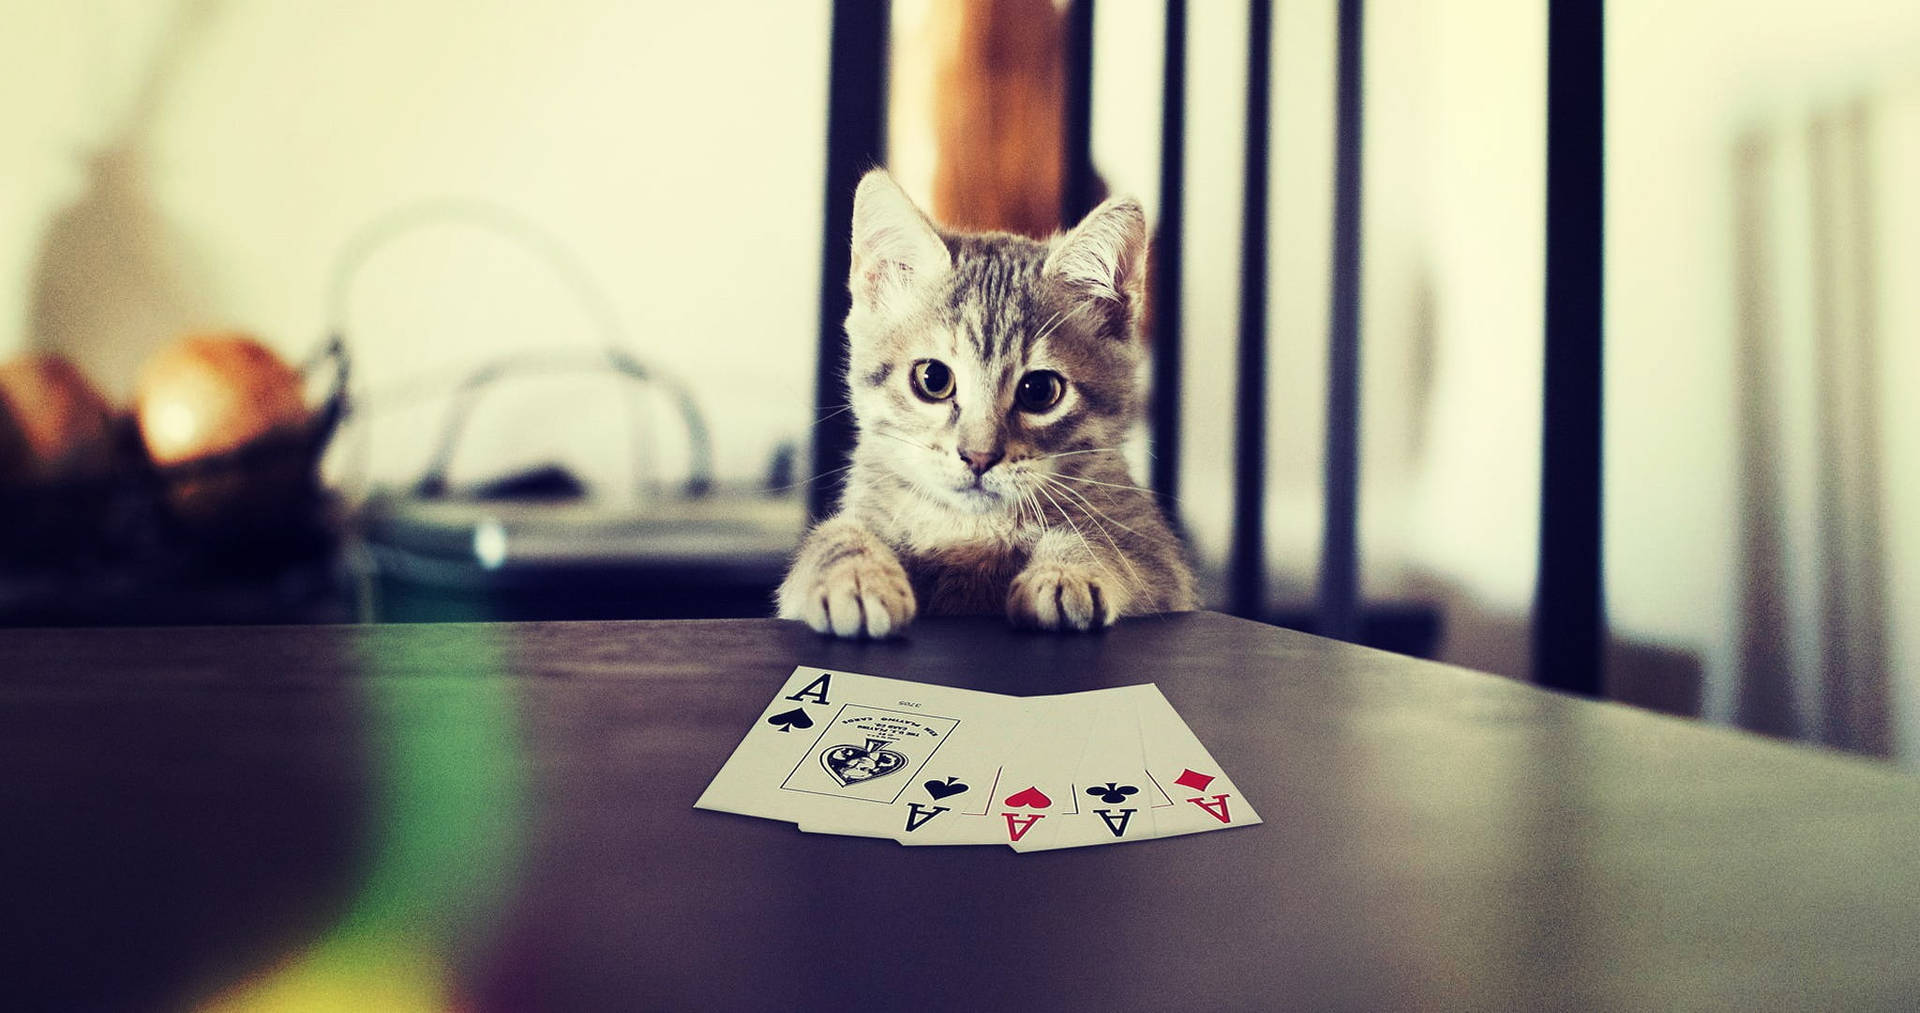 Cat With Poker Aces Wallpaper